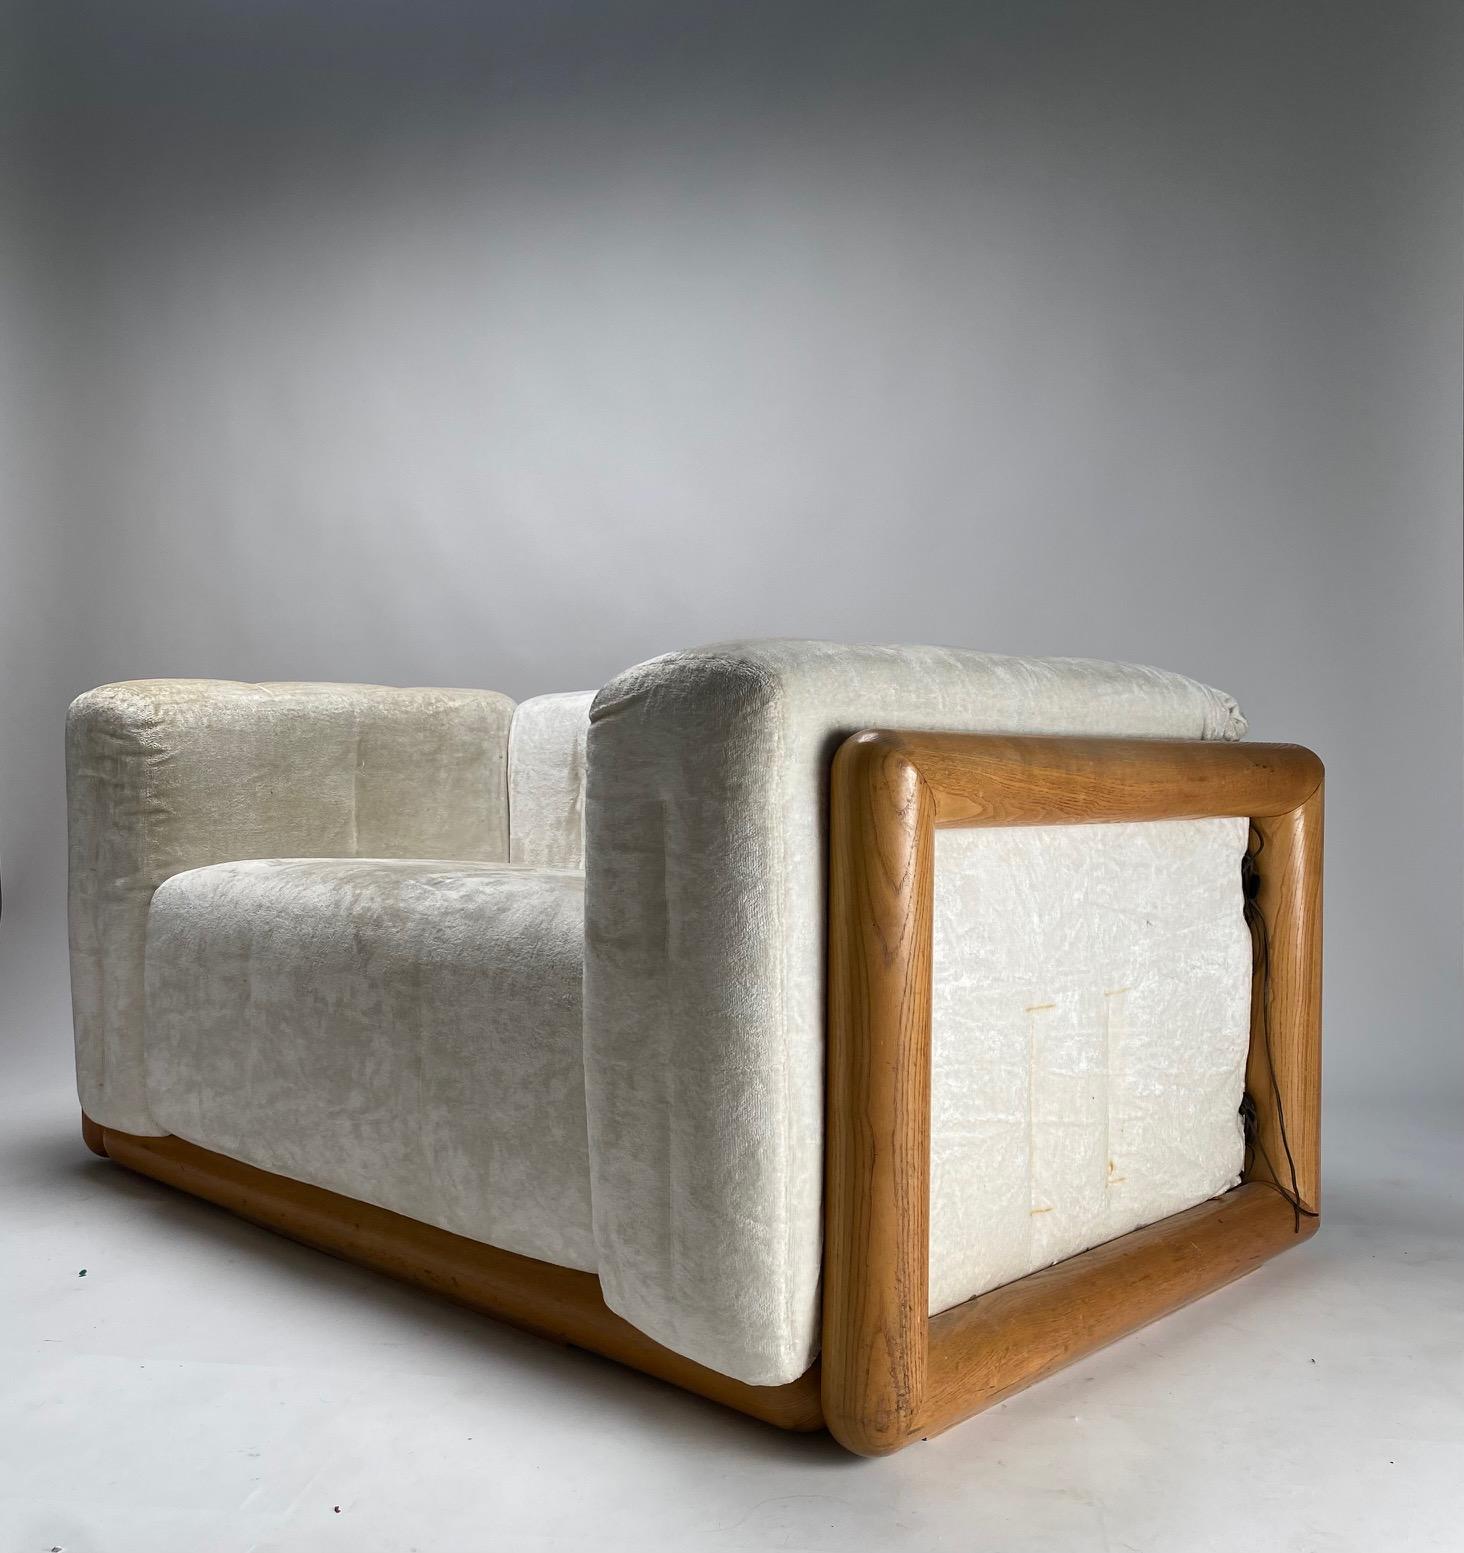 Carlo Scarpa, Cornaro 140 armchair in ash wood, made for Gavina, Italy, 1973

This is one of the rarest and most fascinating versions of the famous sofa created by Carlo Scarpa, which due to its generous dimensions and comfort can also be used as a